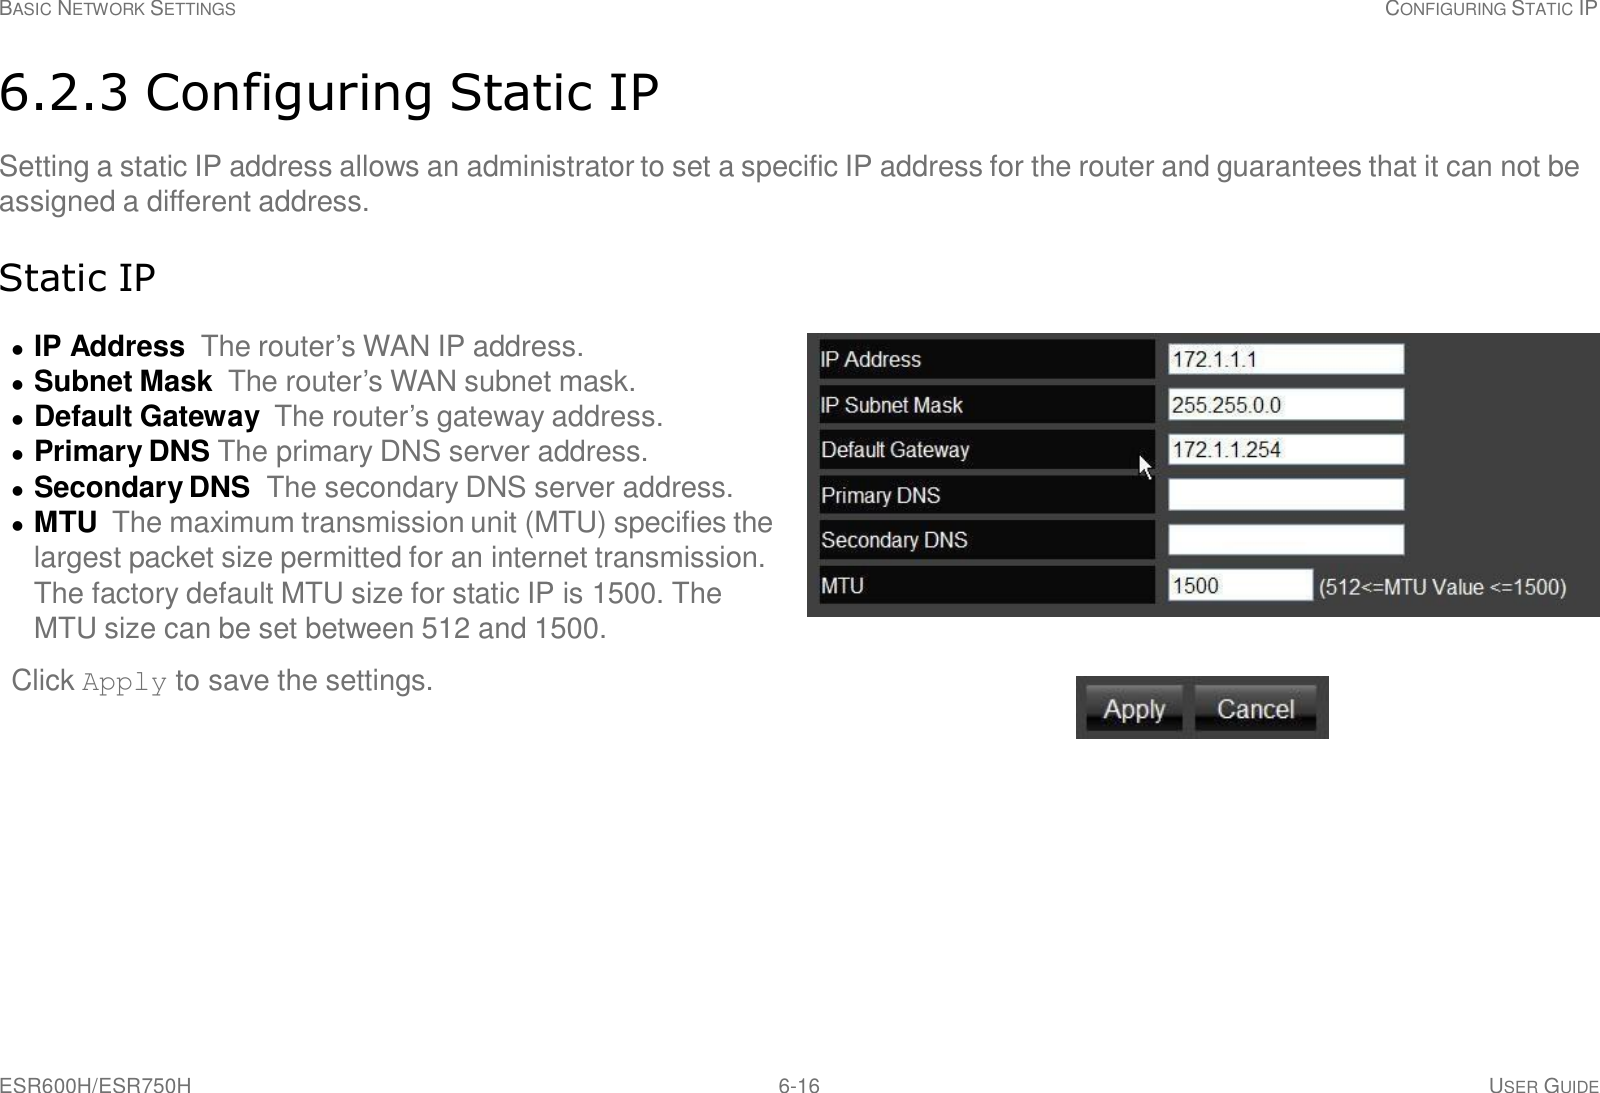 ESR600H/ESR750H 6-16 USER GUIDE BASIC NETWORK SETTINGS CONFIGURING STATIC IP     6.2.3 Configuring Static IP  Setting a static IP address allows an administrator to set a specific IP address for the router and guarantees that it can not be assigned a different address.   Static IP    IP Address The router’s WAN IP address.   Subnet Mask The router’s WAN subnet mask.   Default Gateway  The router’s gateway address.   Primary DNS The primary DNS server address.   Secondary DNS  The secondary DNS server address.   MTU  The maximum transmission unit (MTU) specifies the largest packet size permitted for an internet transmission. The factory default MTU size for static IP is 1500. The MTU size can be set between 512 and 1500.  Click Apply to save the settings. 